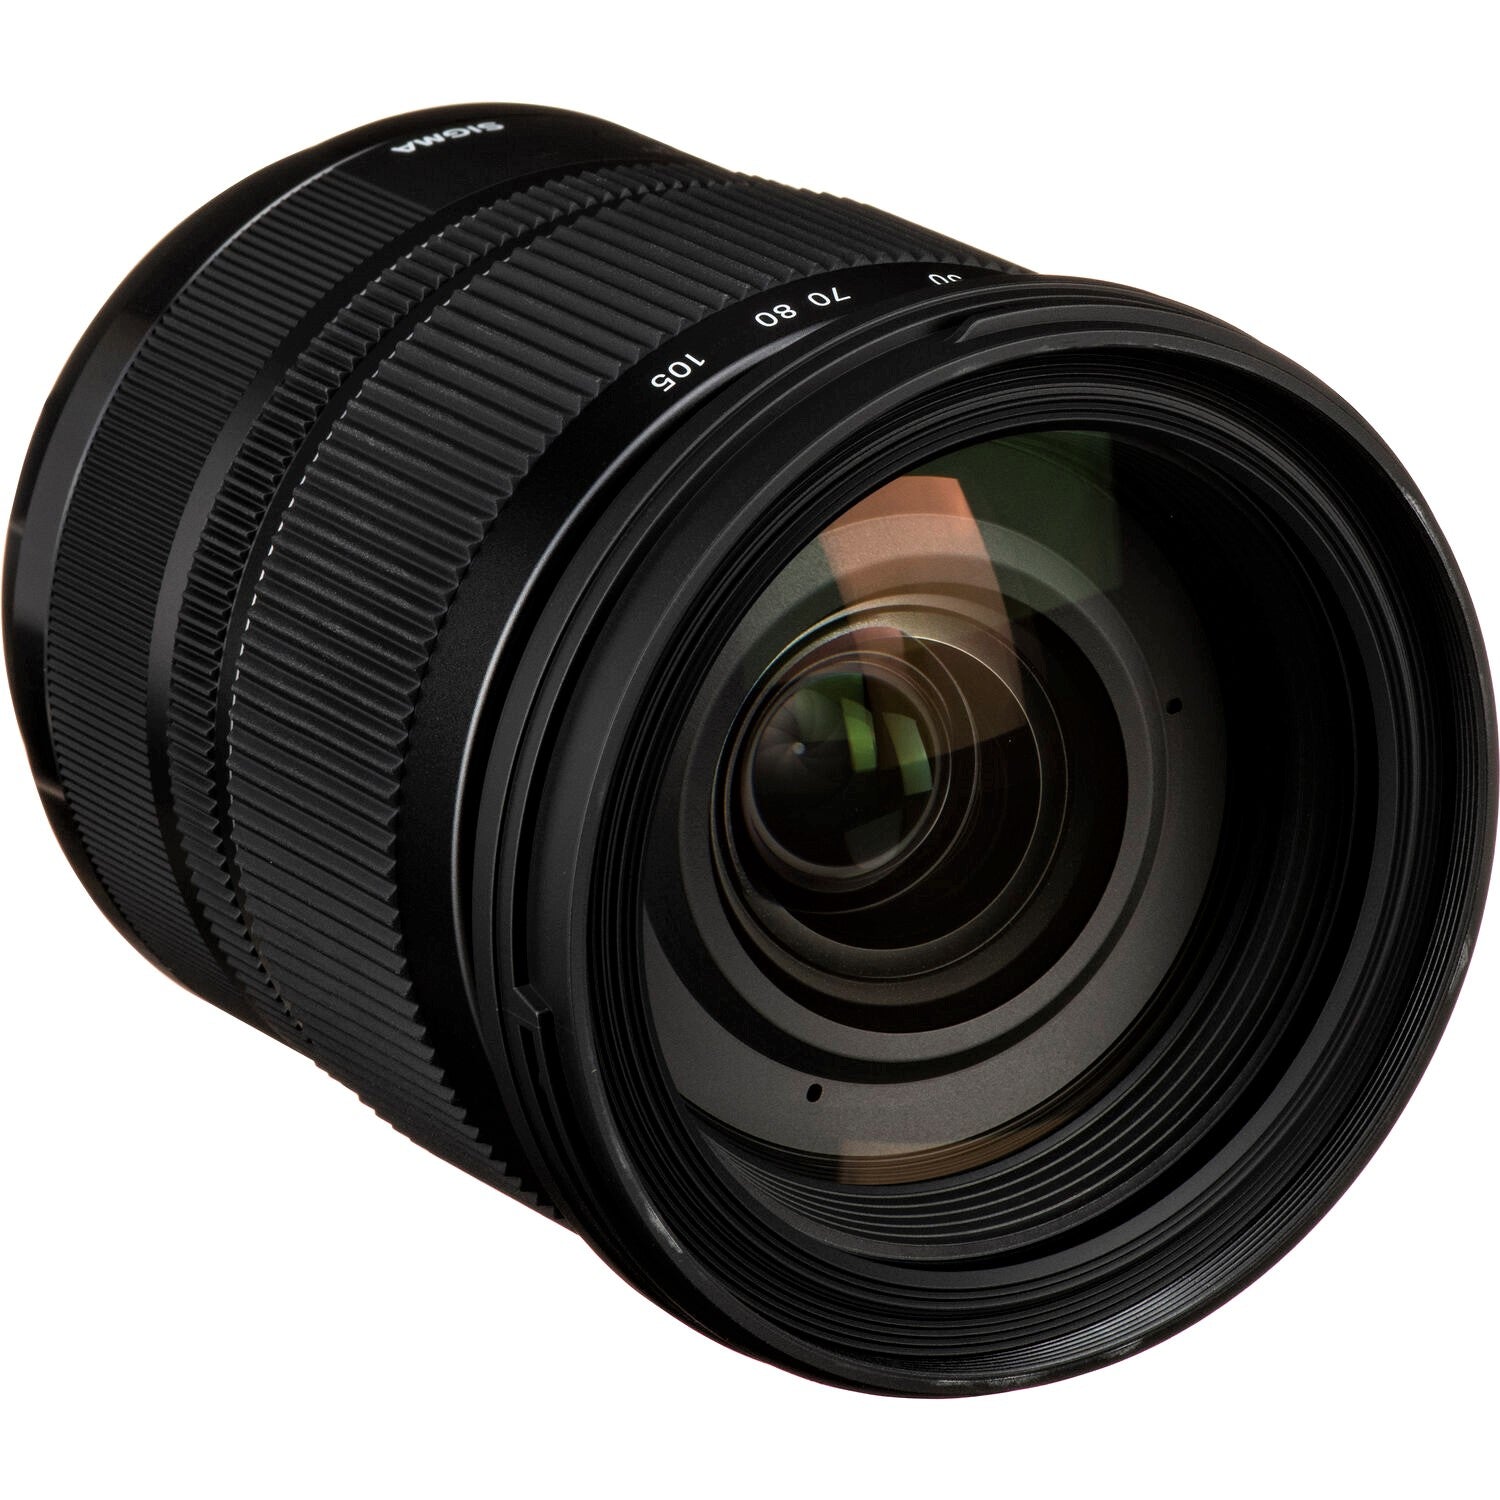 Sigma 24-105mm F4.0 DG OS HSM Art Lens (Sony A) in a Front-Side View